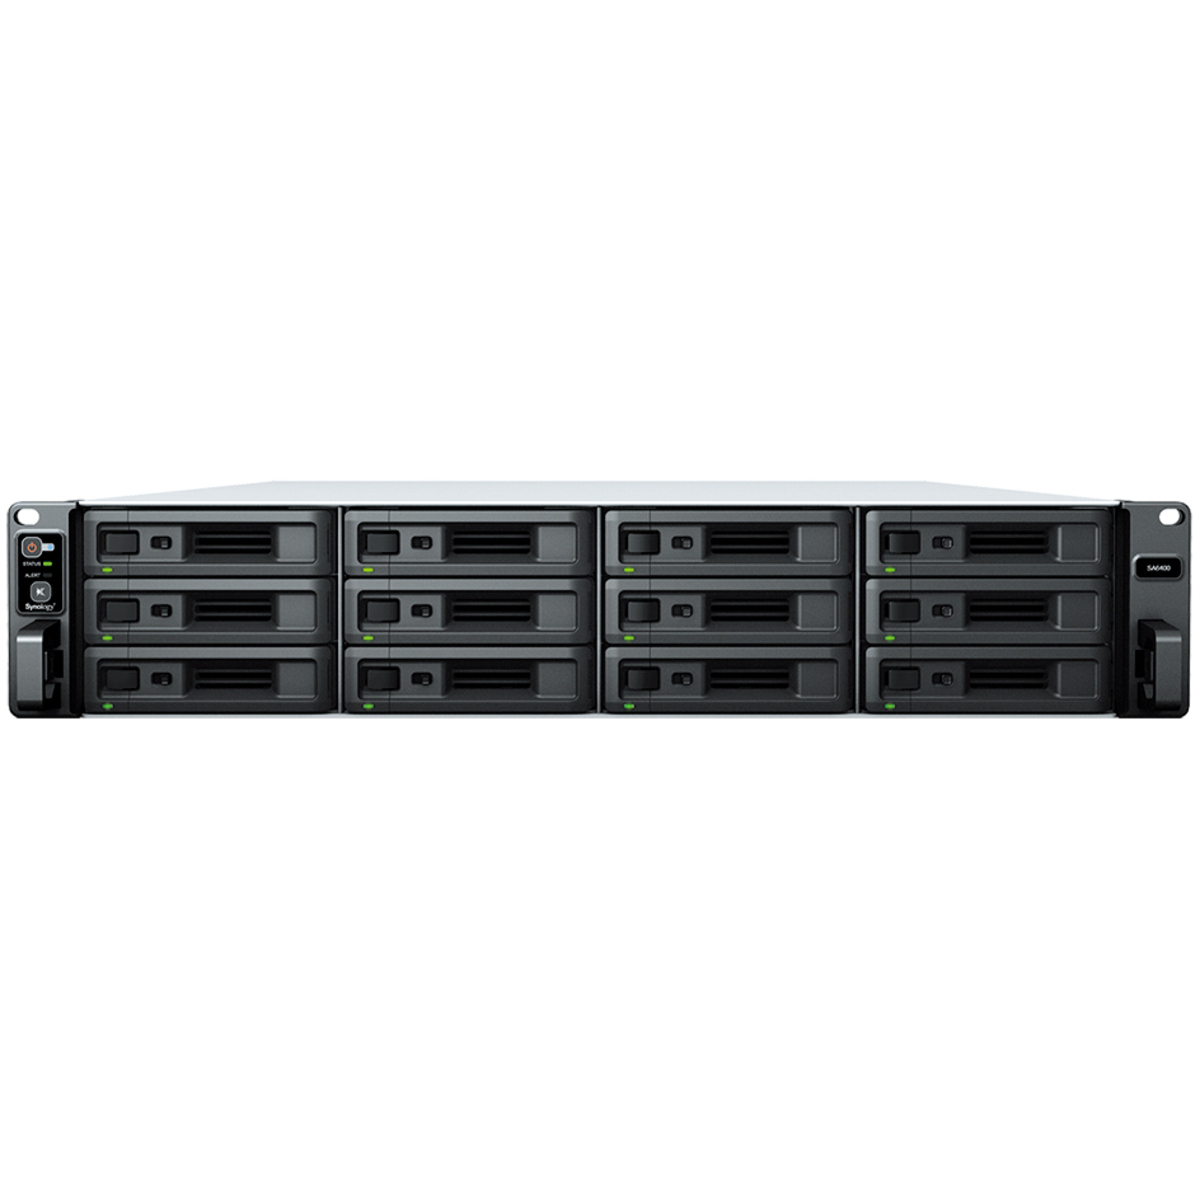 Synology RackStation SA6400 96tb 12-Bay RackMount Large Business / Enterprise NAS - Network Attached Storage Device 8x12tb Synology HAT5300 Series HAT5300-12T 3.5 7200rpm SATA 6Gb/s HDD ENTERPRISE Class Drives Installed - Burn-In Tested RackStation SA6400